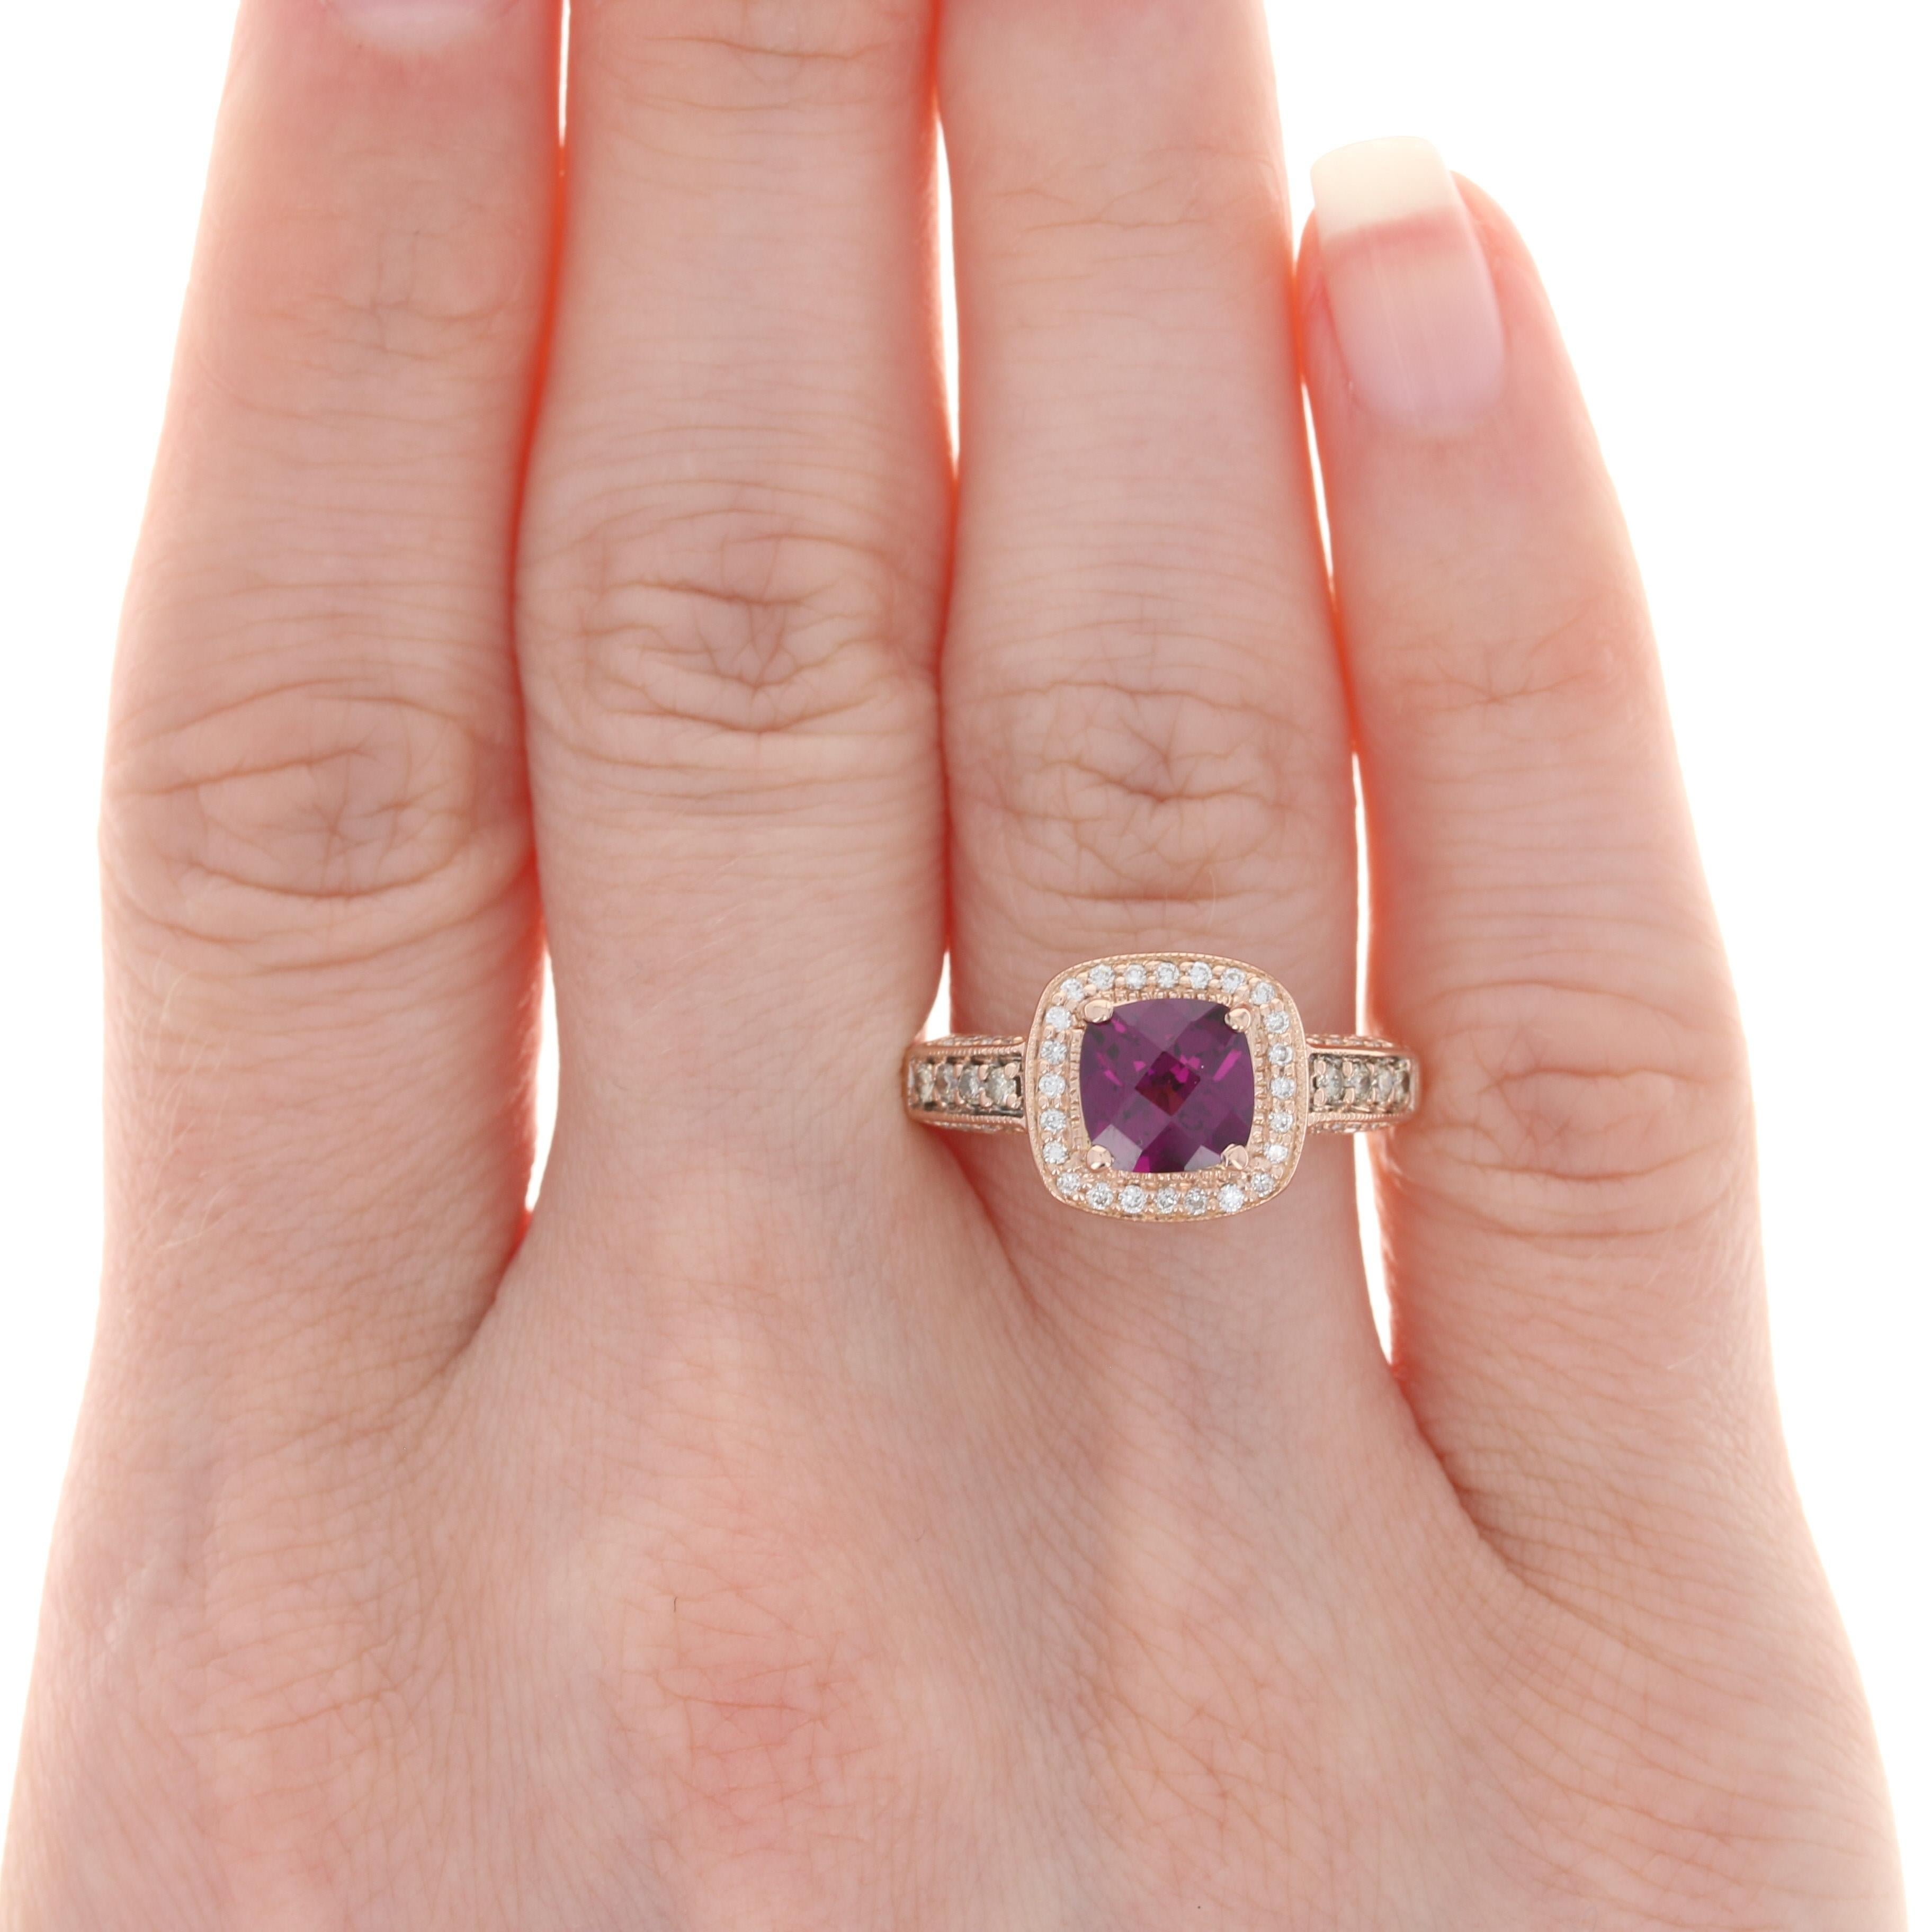 Size: 8 1/4
Sizing Fee: Up or Down 1 size for $30

Brand: Le Vian

Metal Content: 14k Rose Gold

Stone Information: 
Genuine Rhodolite Garnet
Carat: 1.77ct
Cut: Checkerboard Cushion
Color: Reddish Purple
Size: 6.9mm x 7mm

Natural Diamonds
Carats: